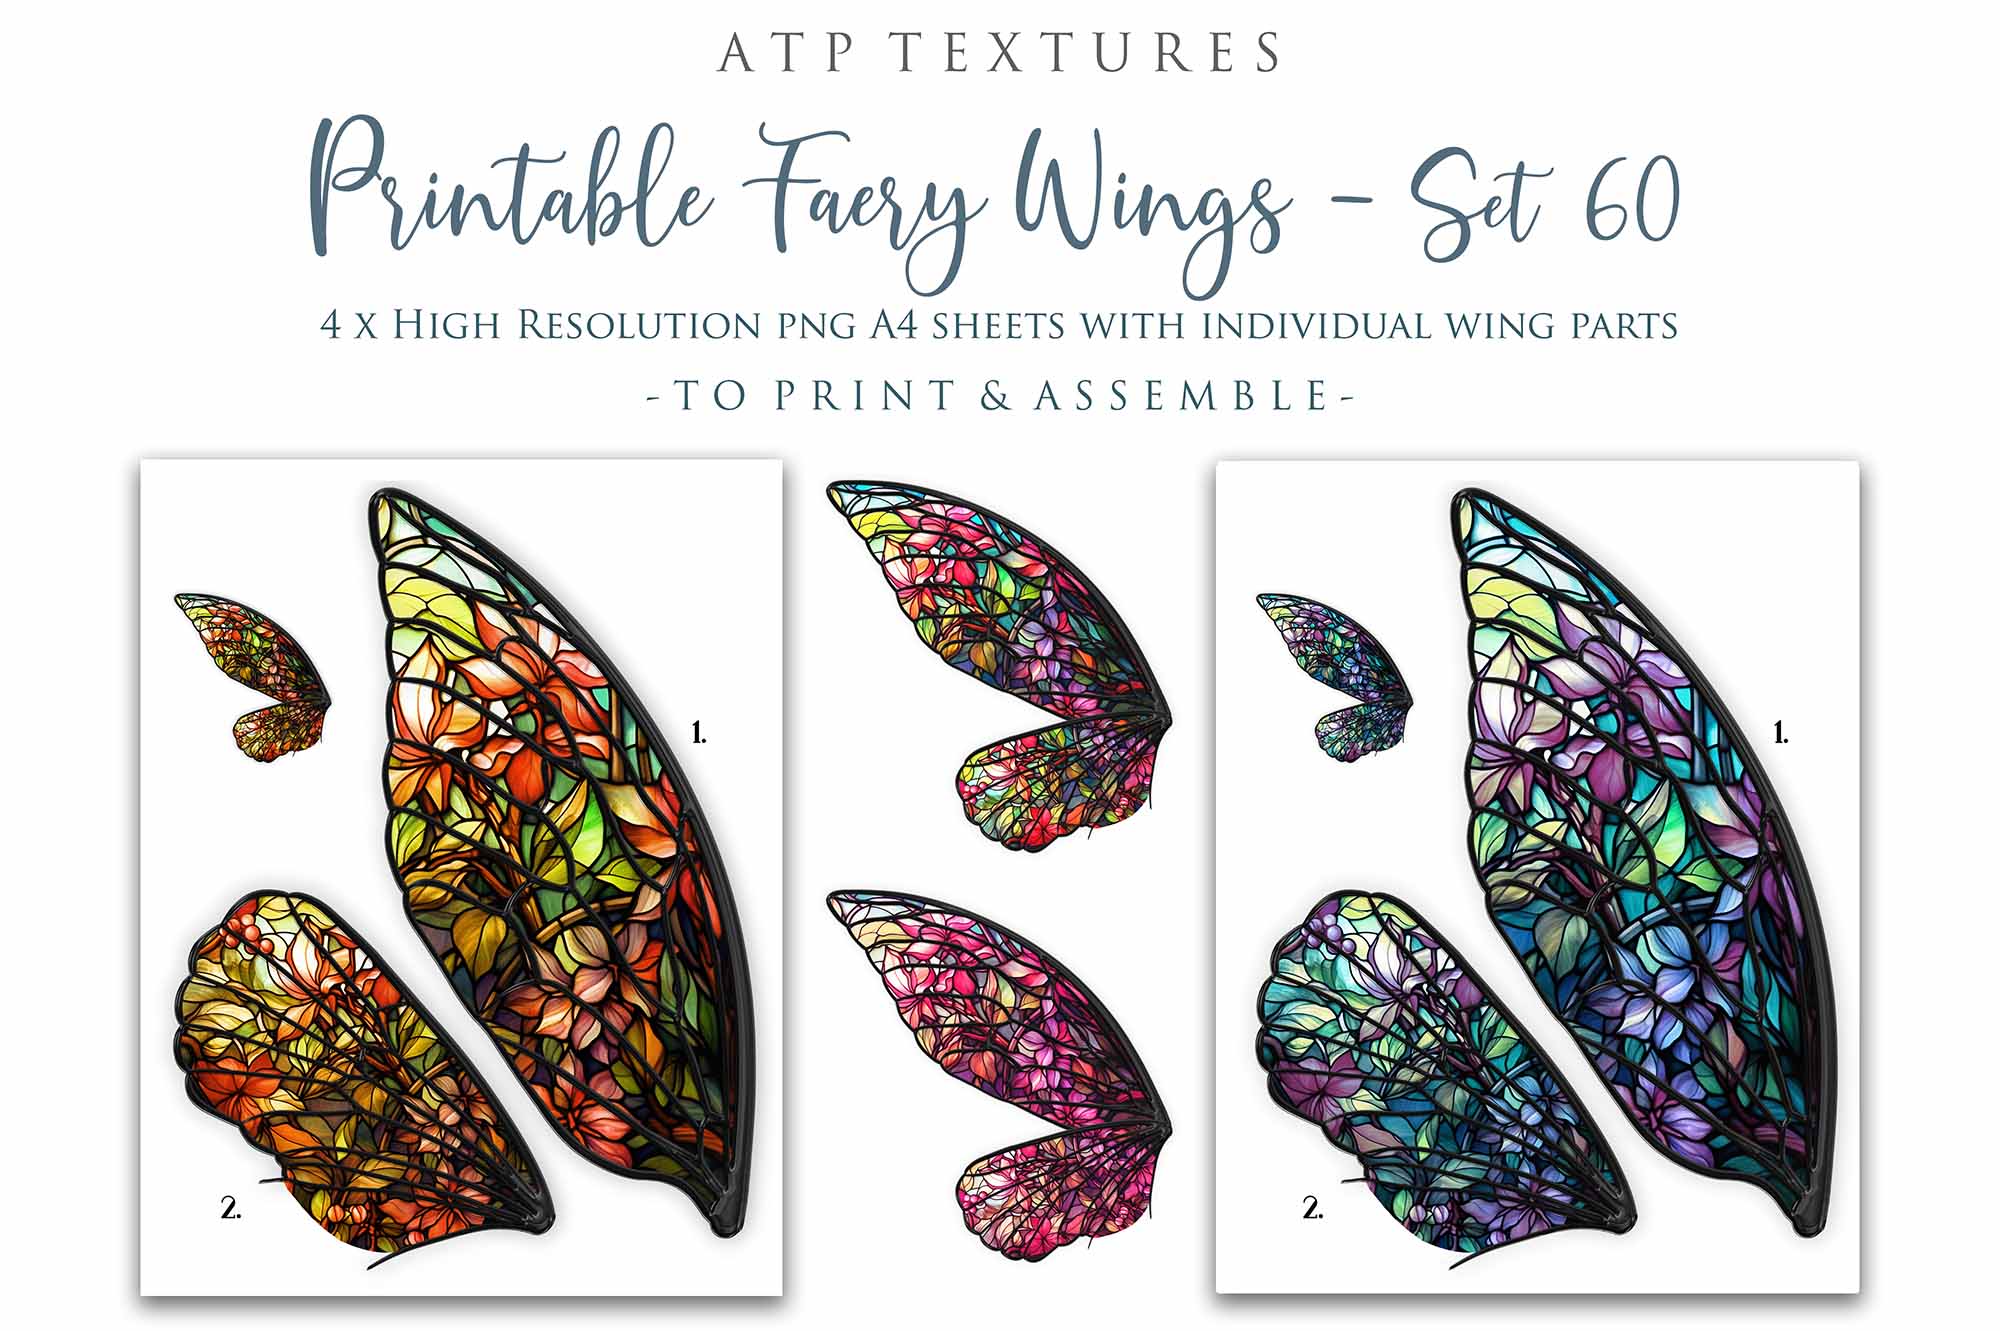 Printable Wings template. For Adult sized wings, child wings, Art dolls. Fairy wings for cosplay. Faerie fantasy, festival, halloween, Costume. Print and assemble. Pattern for making fairy wings.  High resolution Files. Png Overlays. Stained Glass.